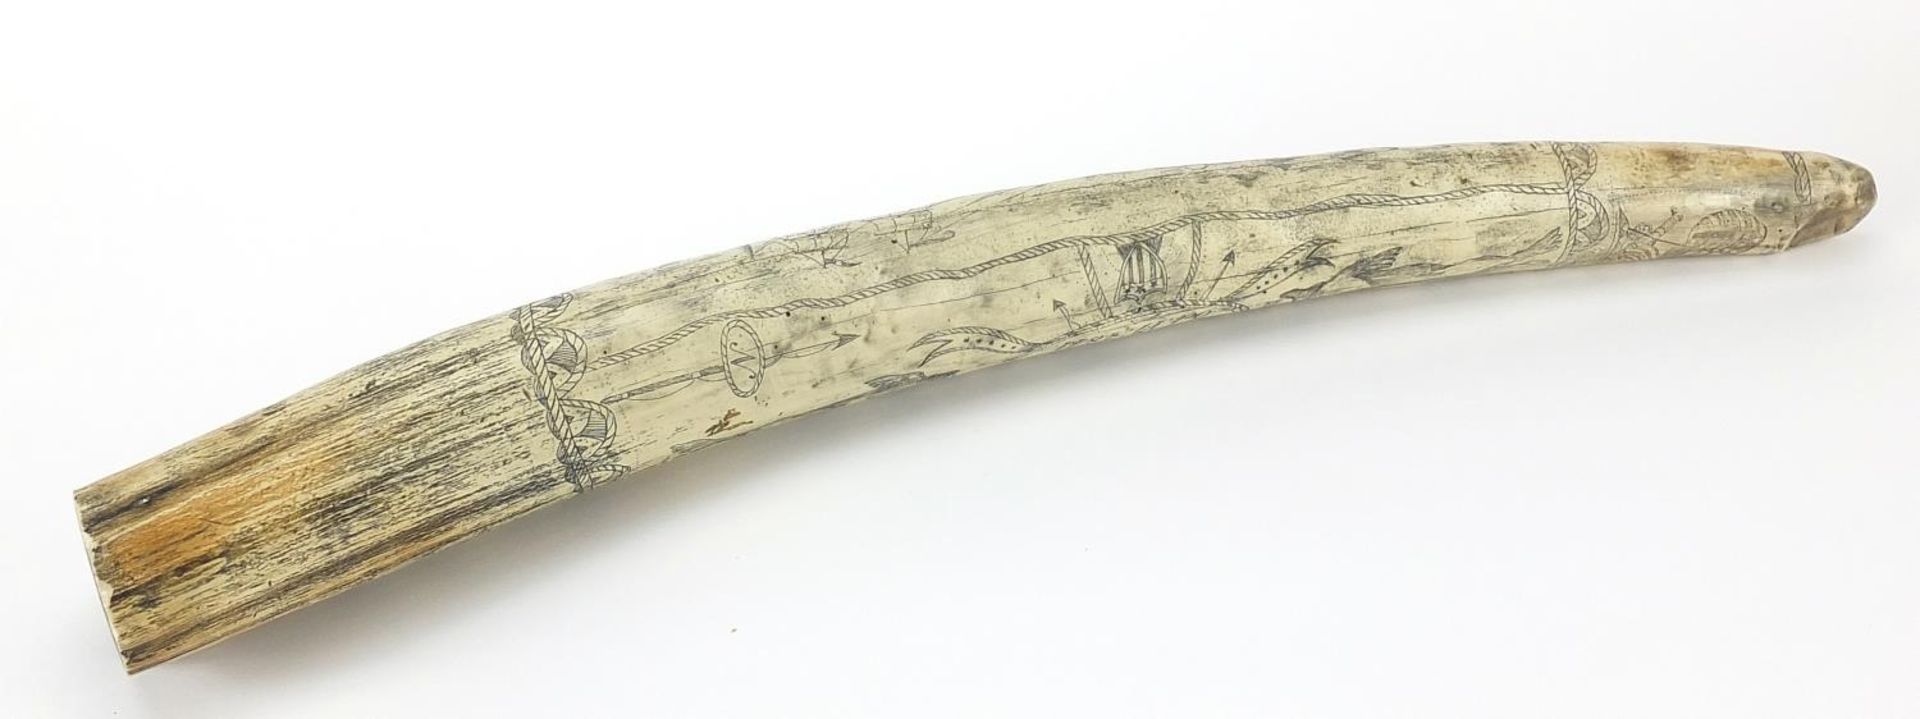 Large scrimshaw style model of a tusk, 53cm in length - Image 3 of 3